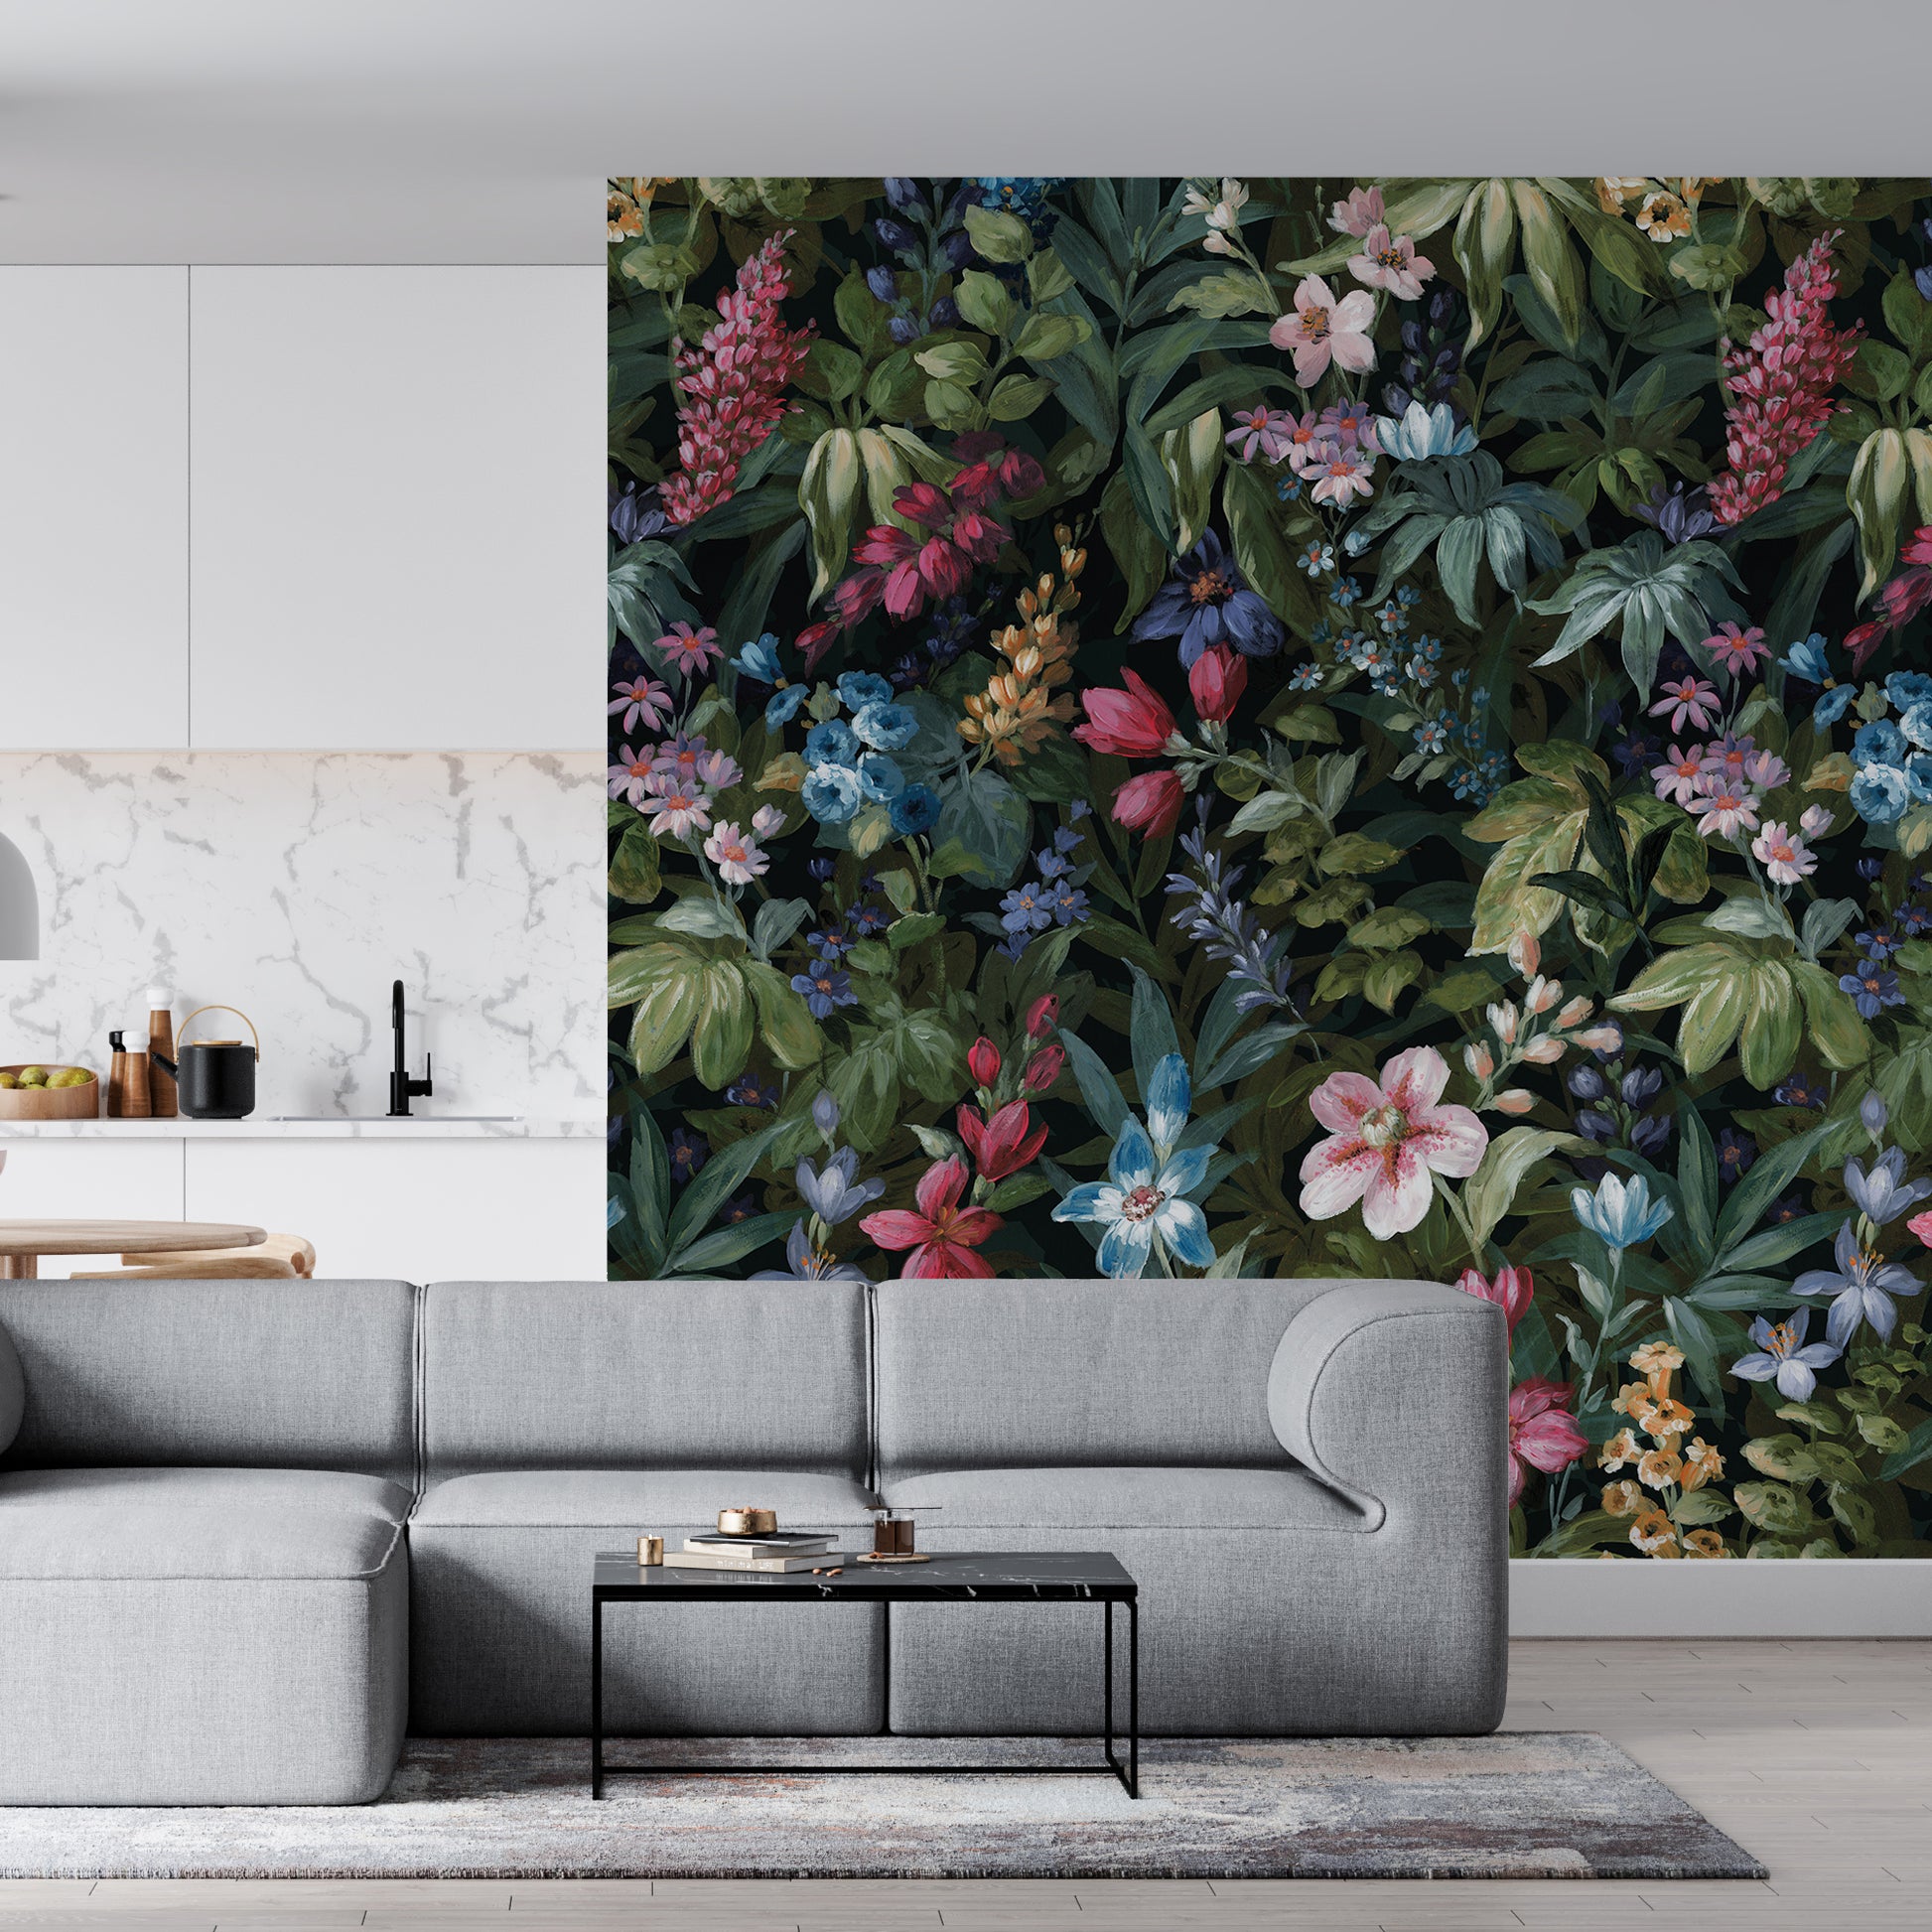 Melli Mello Bloom on baby floral dark photowall living room style interior inspiration characteristic style a corner beautiful wall